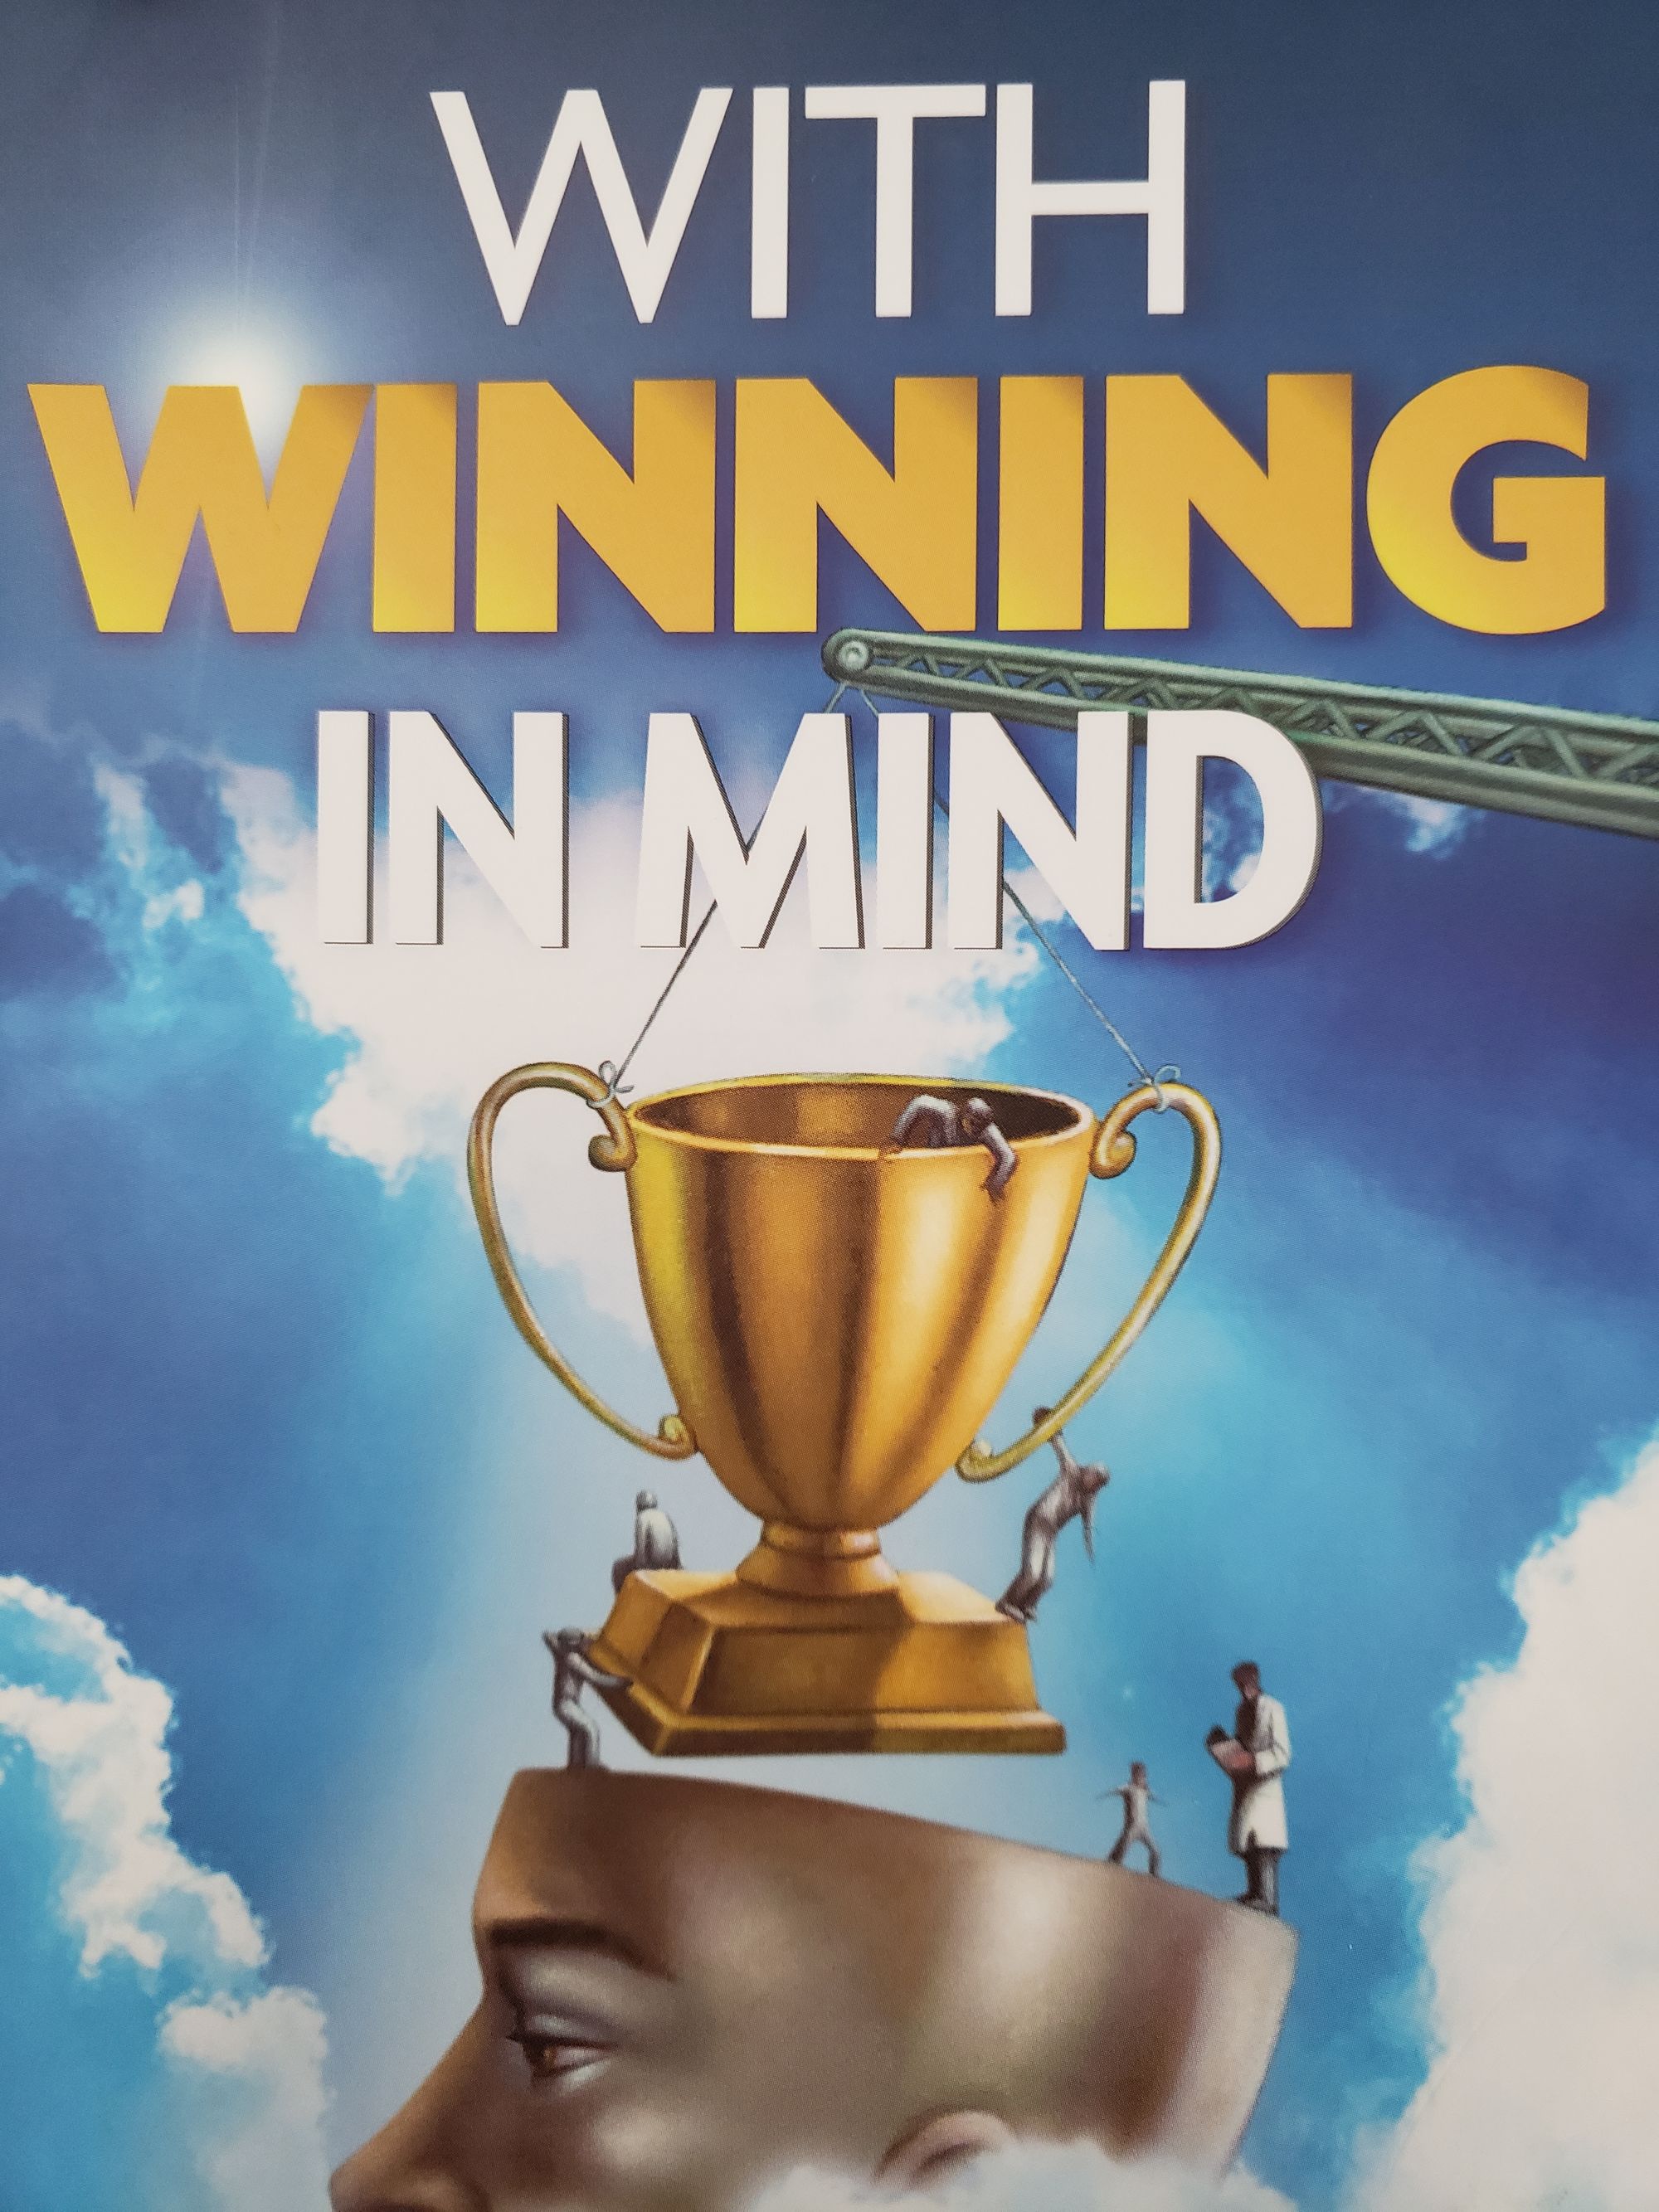 With Winning in Mind Powerpoint: Part 5